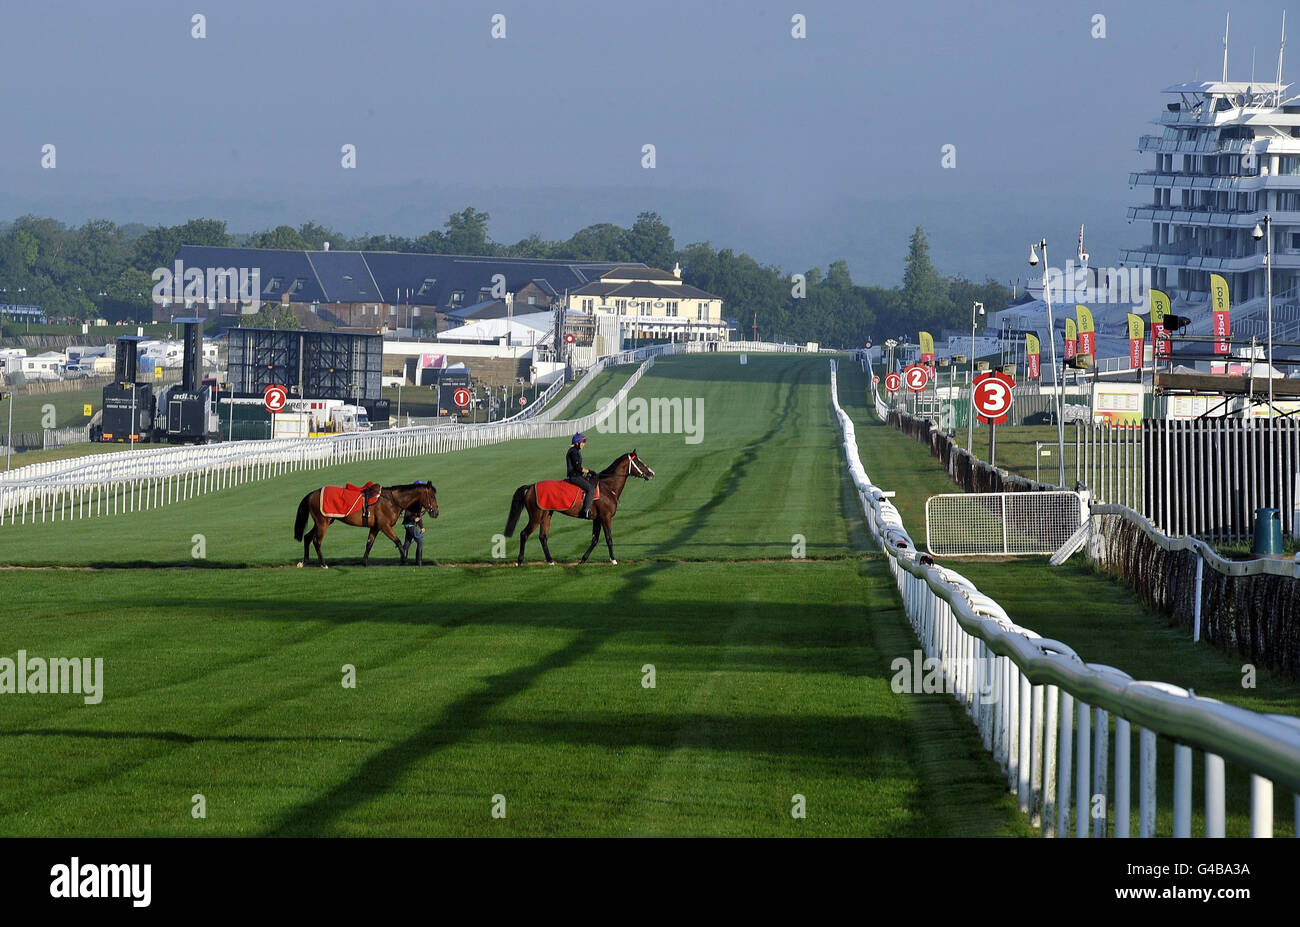 Horse Racing - Investec Derby Festival - Preview Day - Epsom Downs Racecourse. Horses cross the straight on the Gallops at Epsom Downs Racecourse. Stock Photo